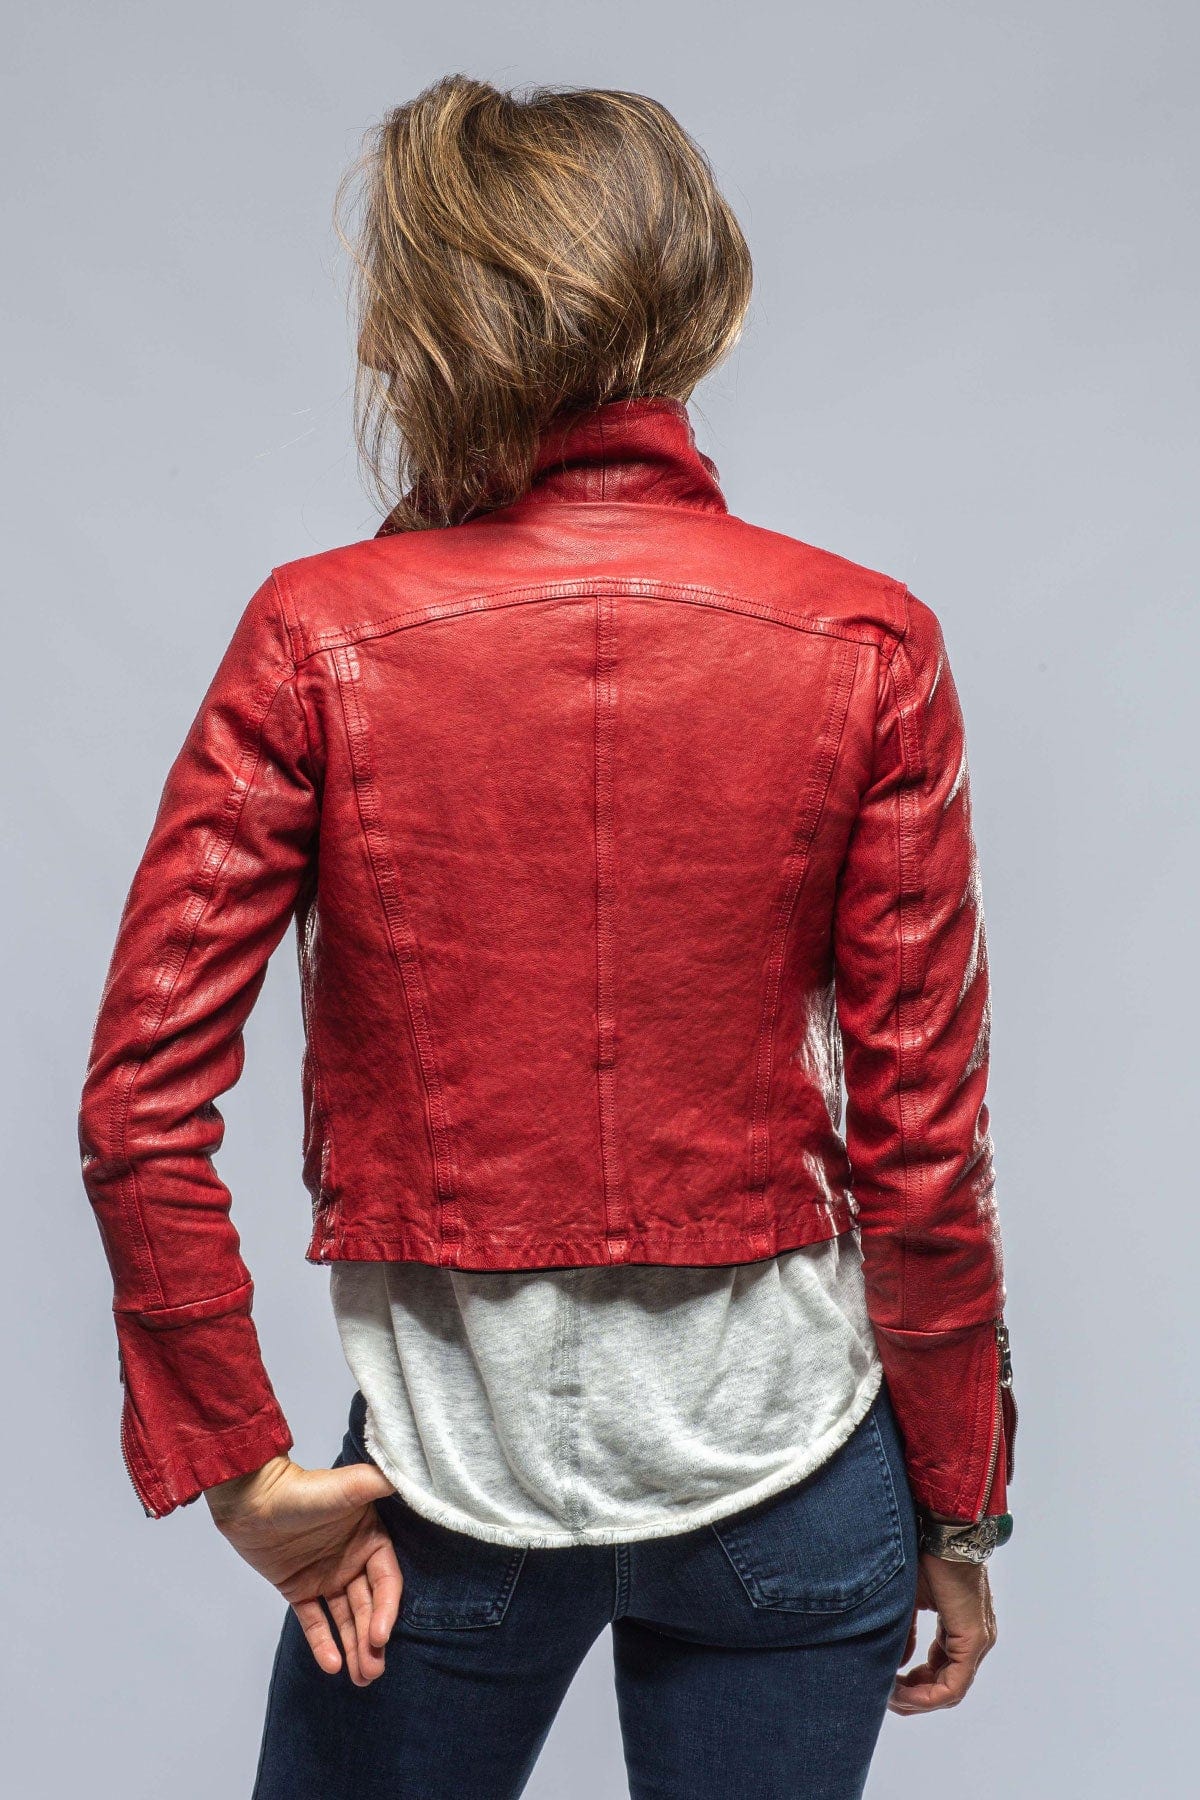 Bristol Leather Jean Jacket in Red - AXEL'S